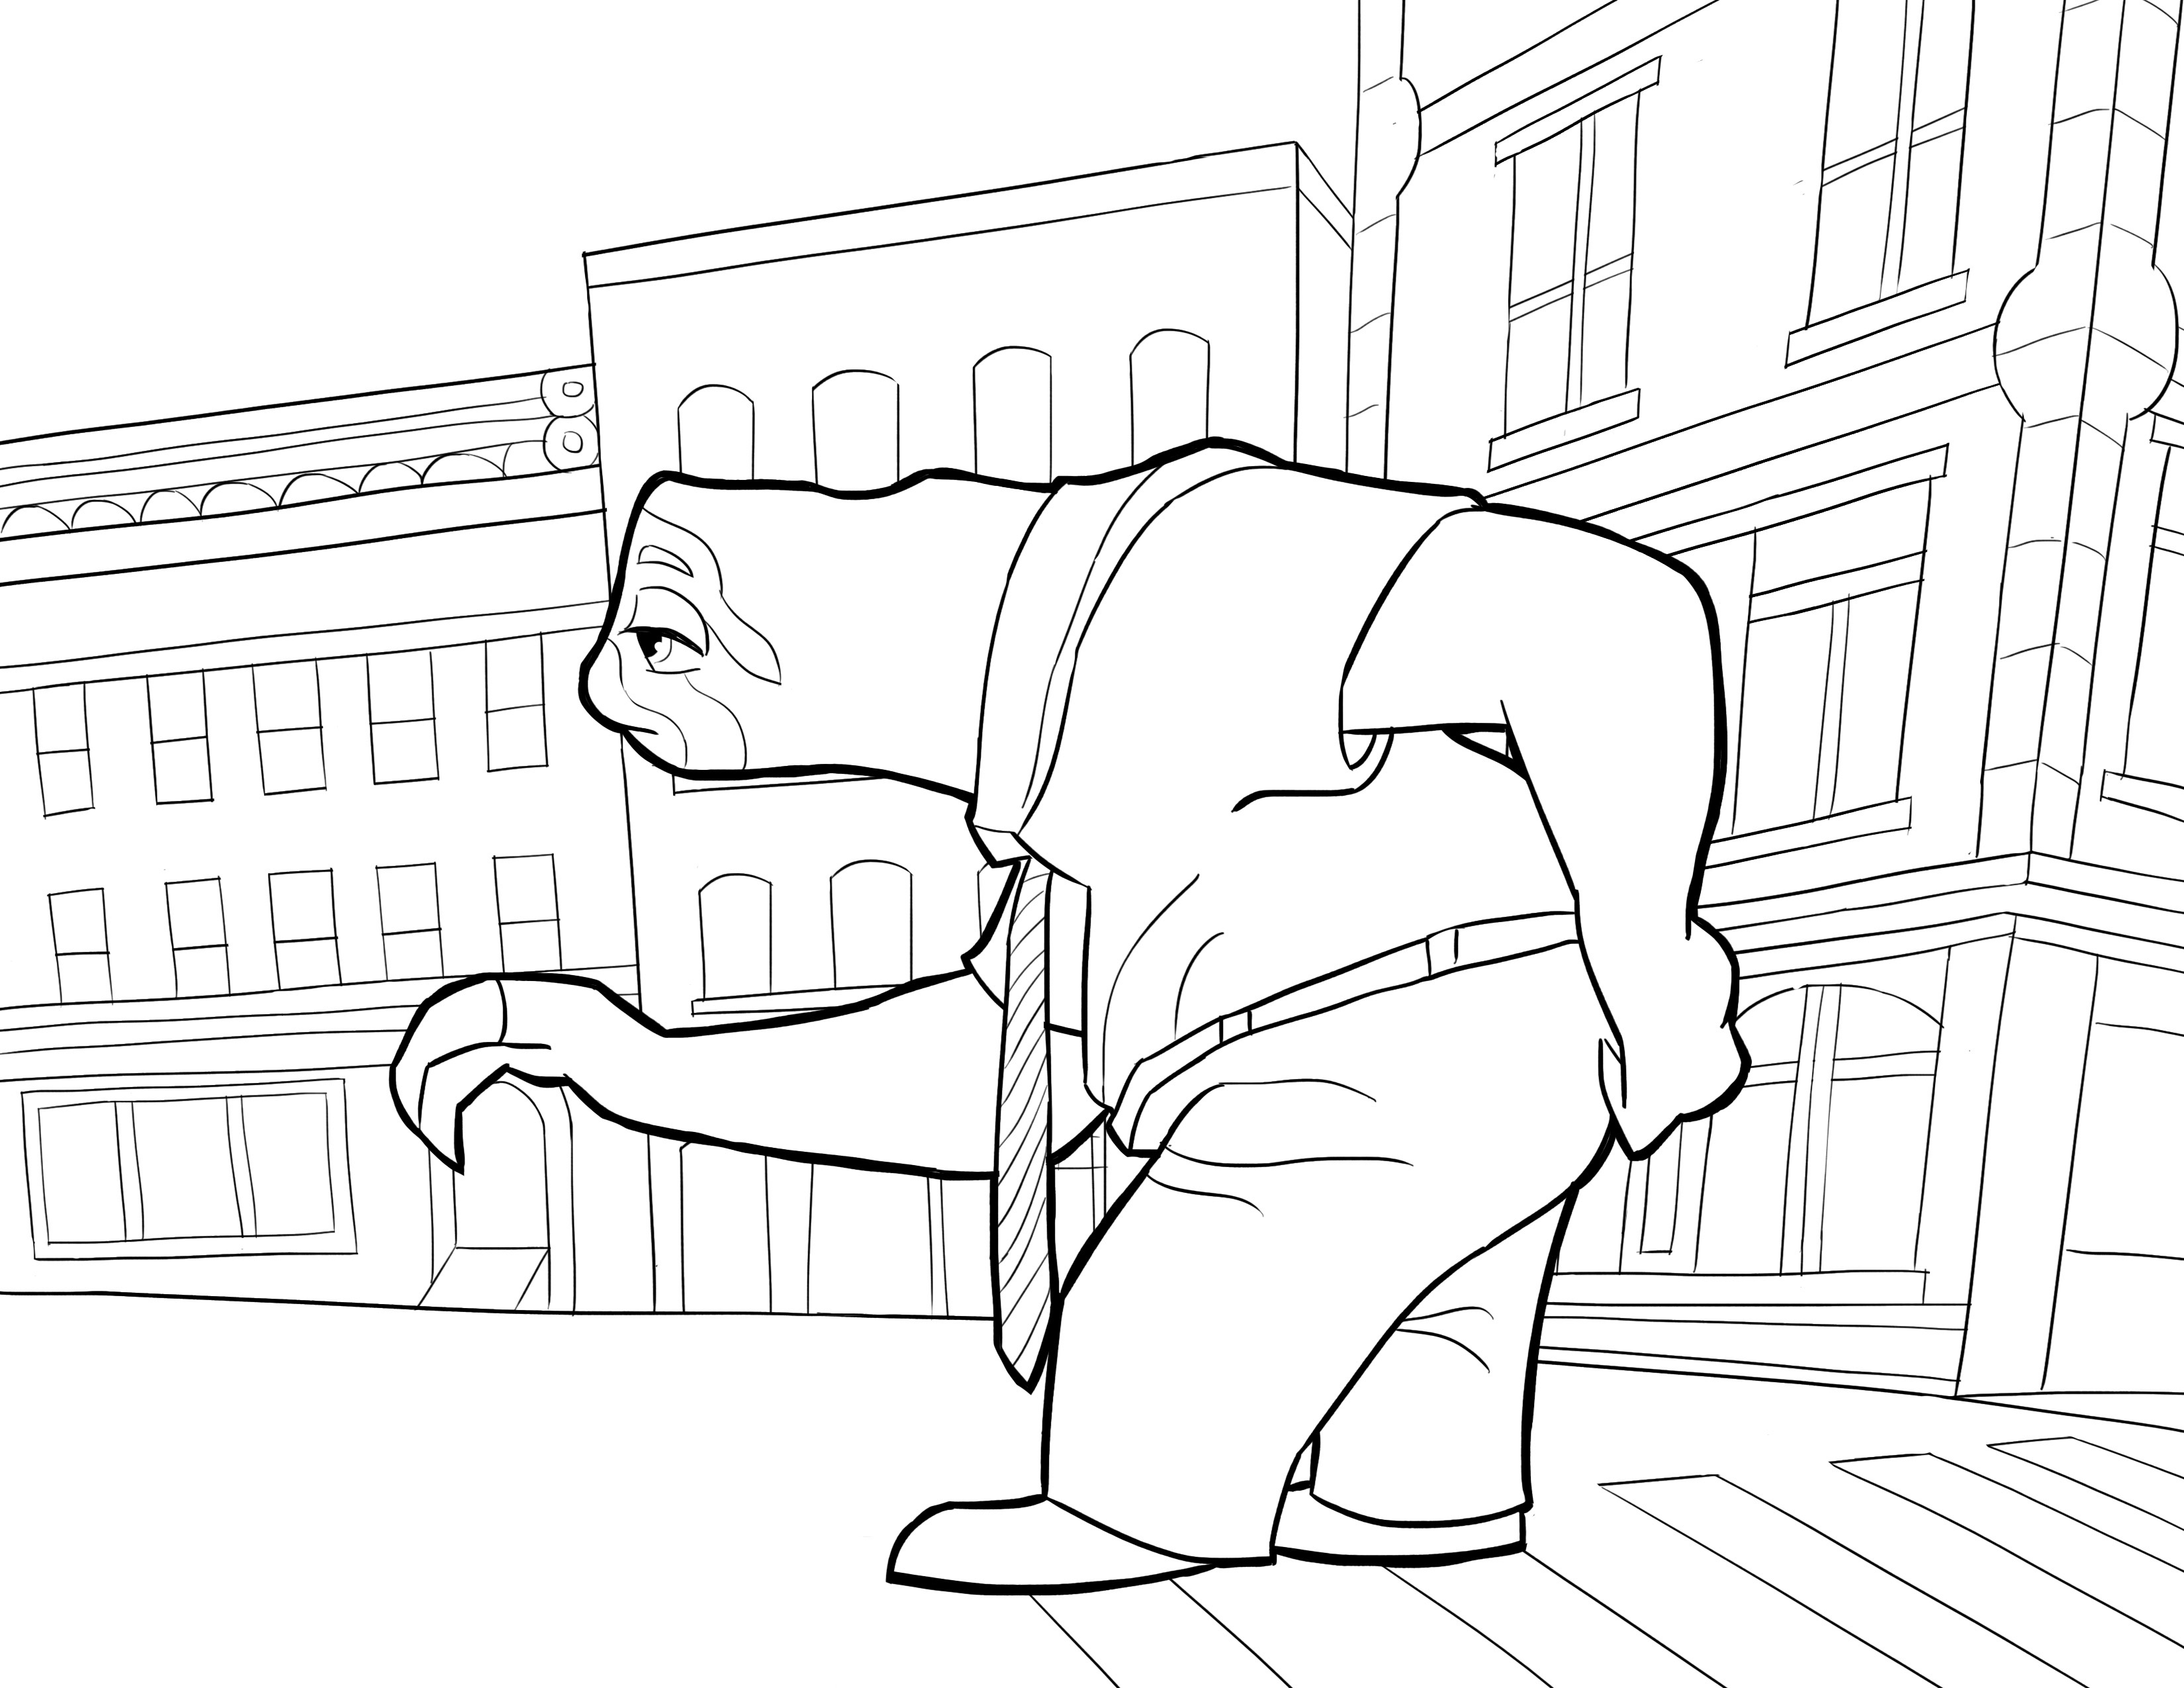 Disney Zootopia coloring page to download for free : Flash Slothmore and beautiful background